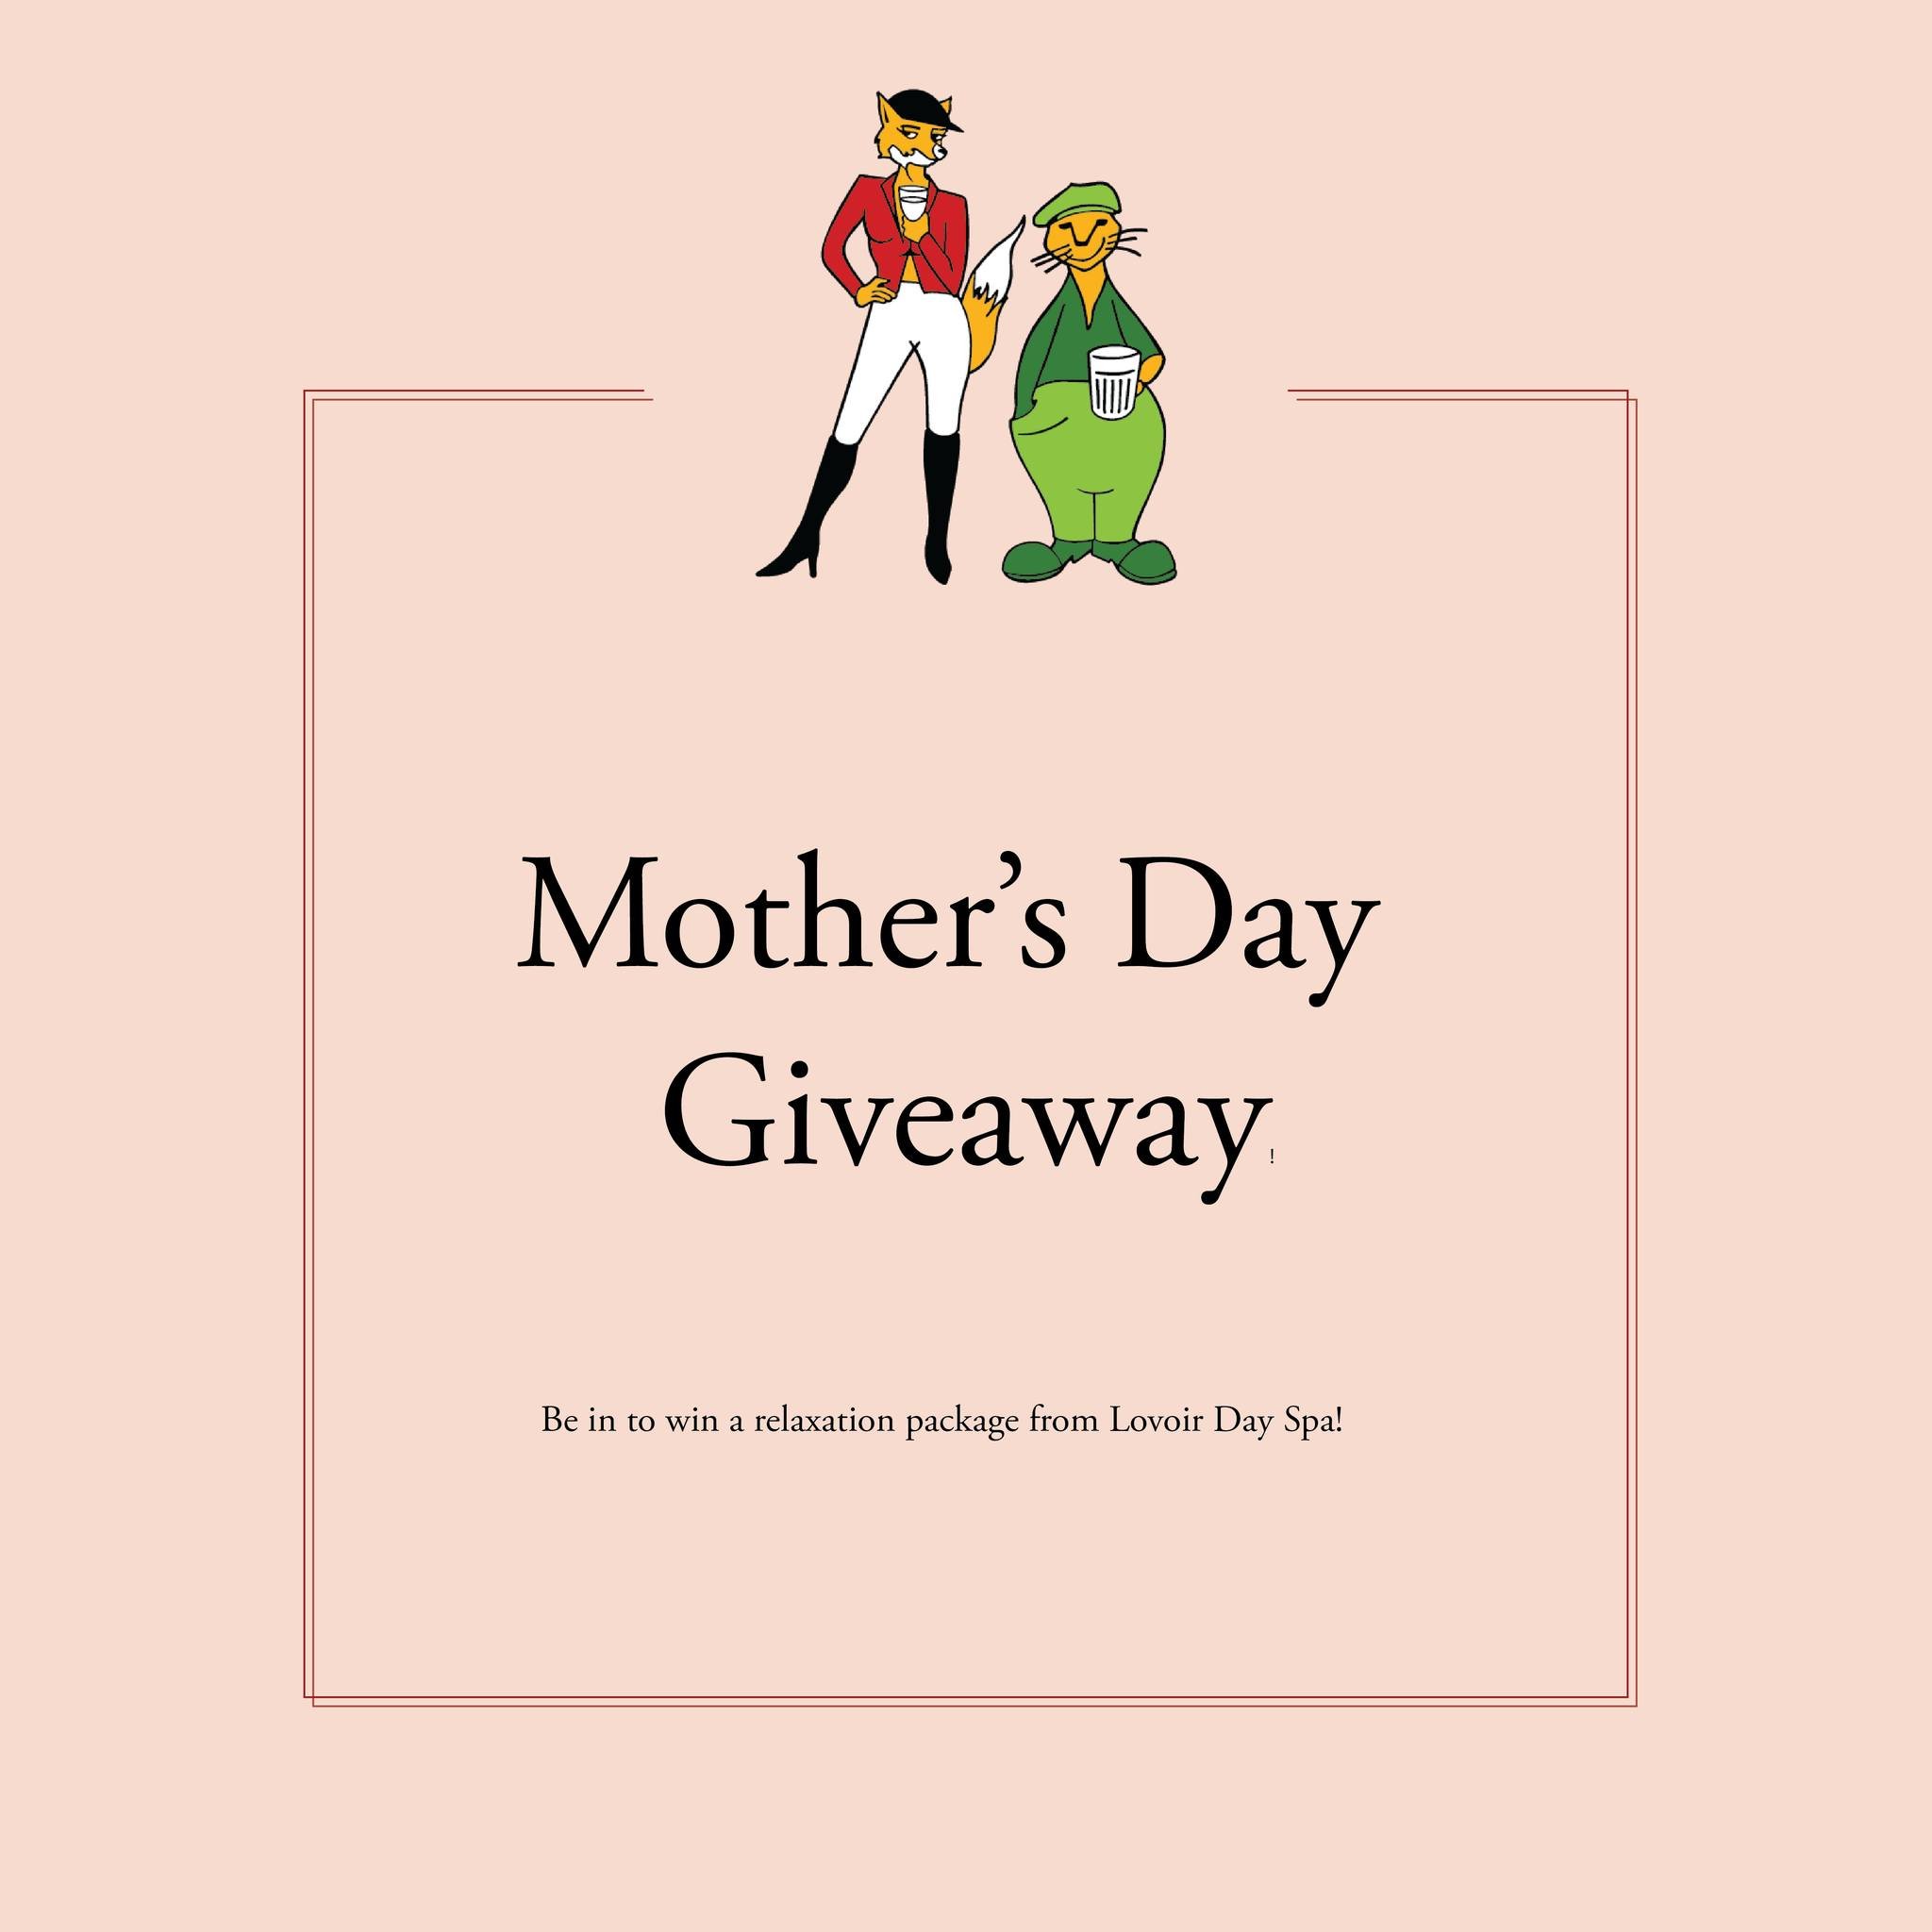 Mums, it's your turn! Book in with us this Mother's Day and be in to win a Lovoir Day Spa relaxation package 😍

Simply book at foxandferret.co.nz/bookings and make sure you choose the &quot;Mother's Day&quot; toggle!

Oh... and there may be a treat 